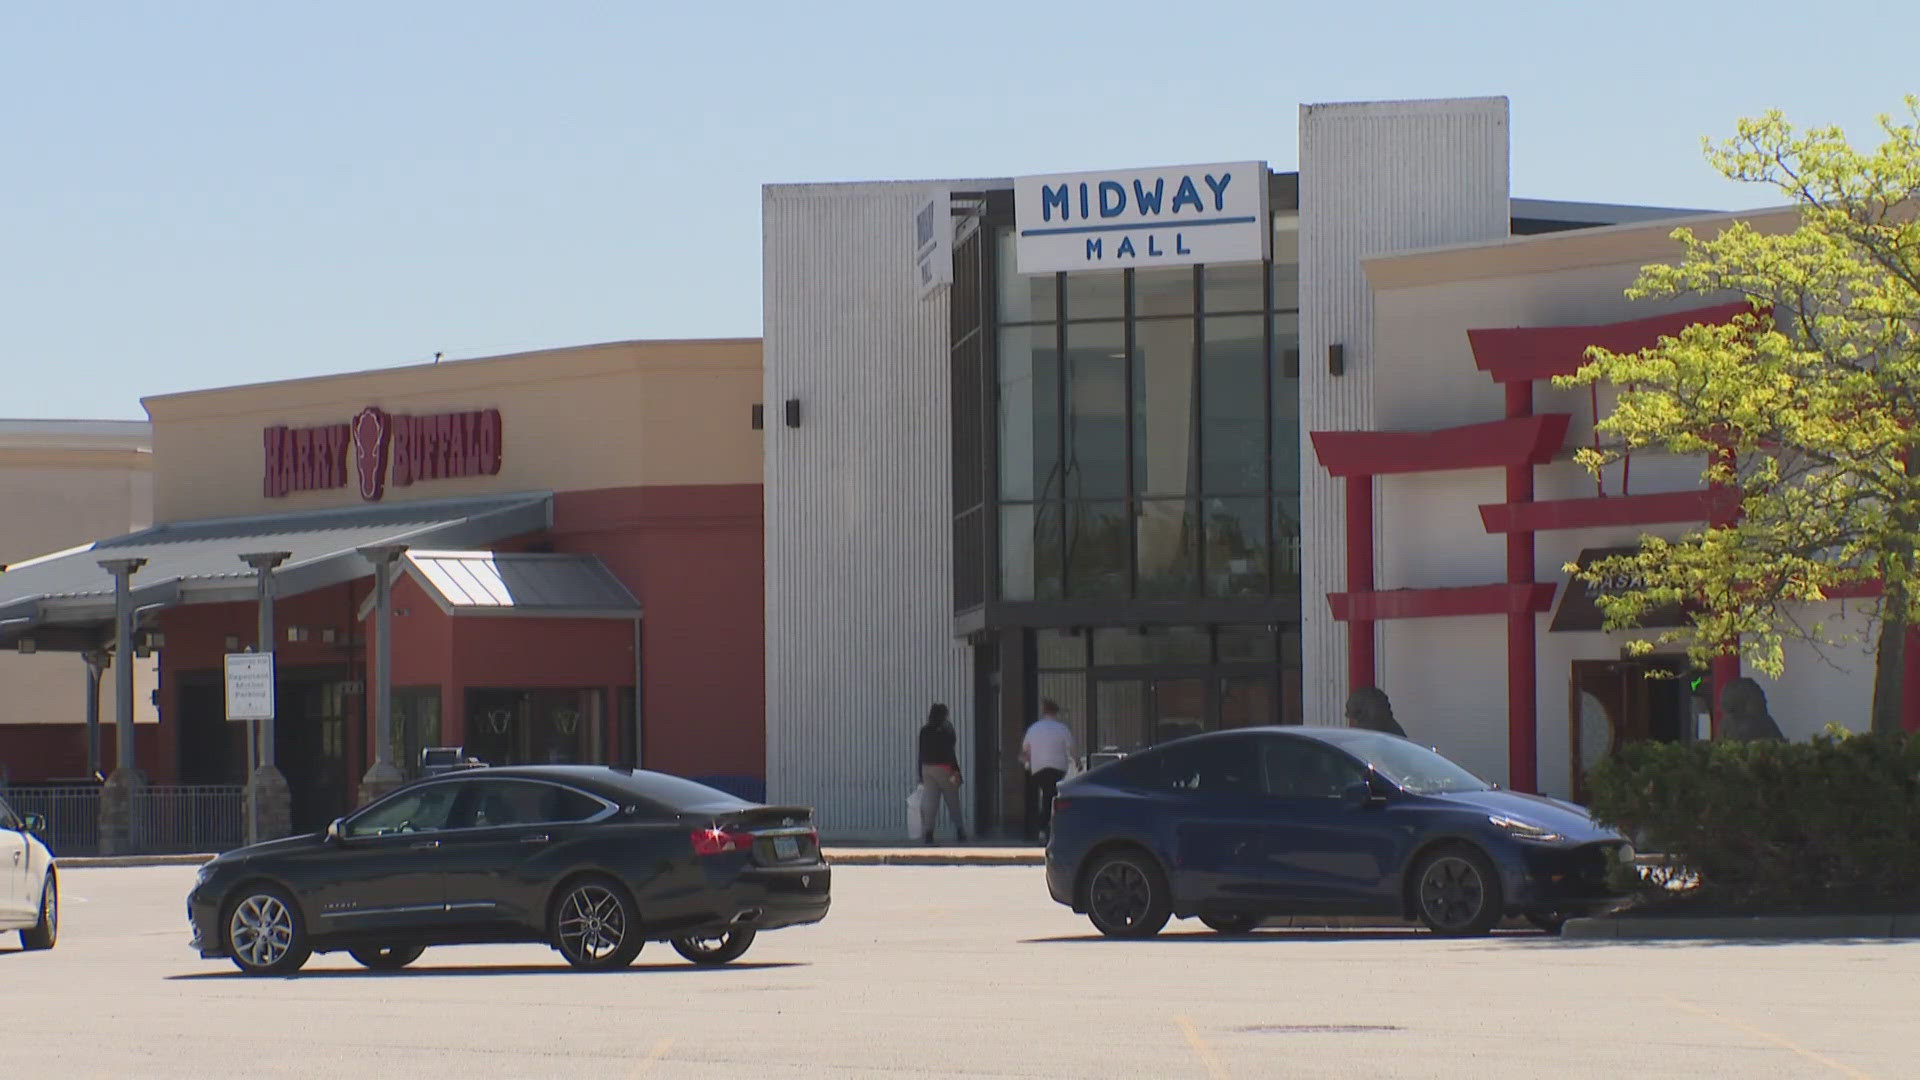 Like many shopping areas, Midway Mall in Elyria has struggled for the last decade. Big changes are now on the horizon.